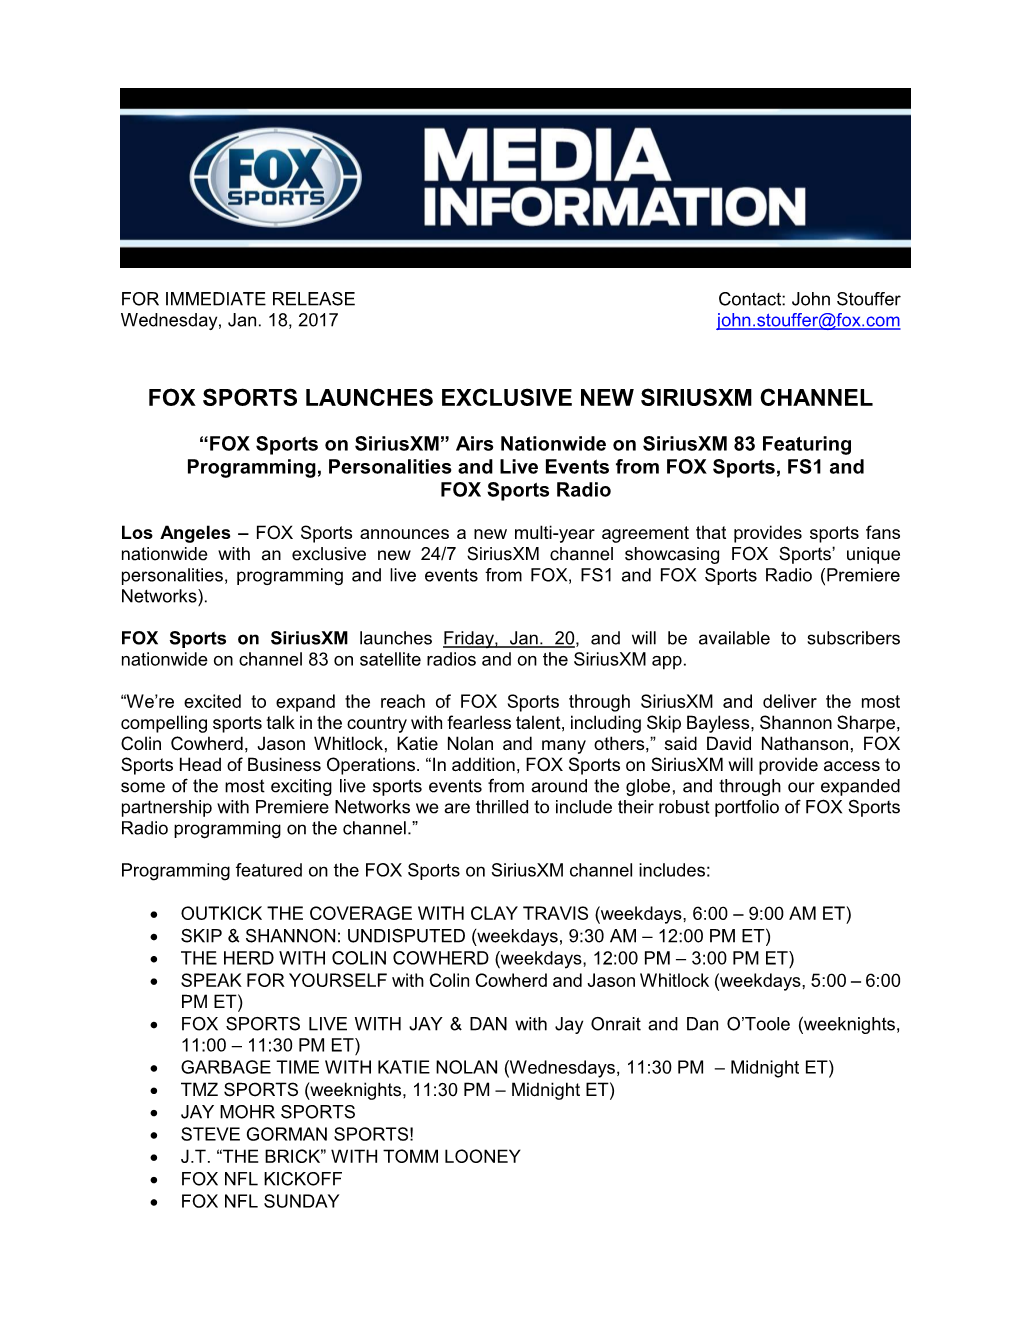 Fox Sports Launches Exclusive New Siriusxm Channel